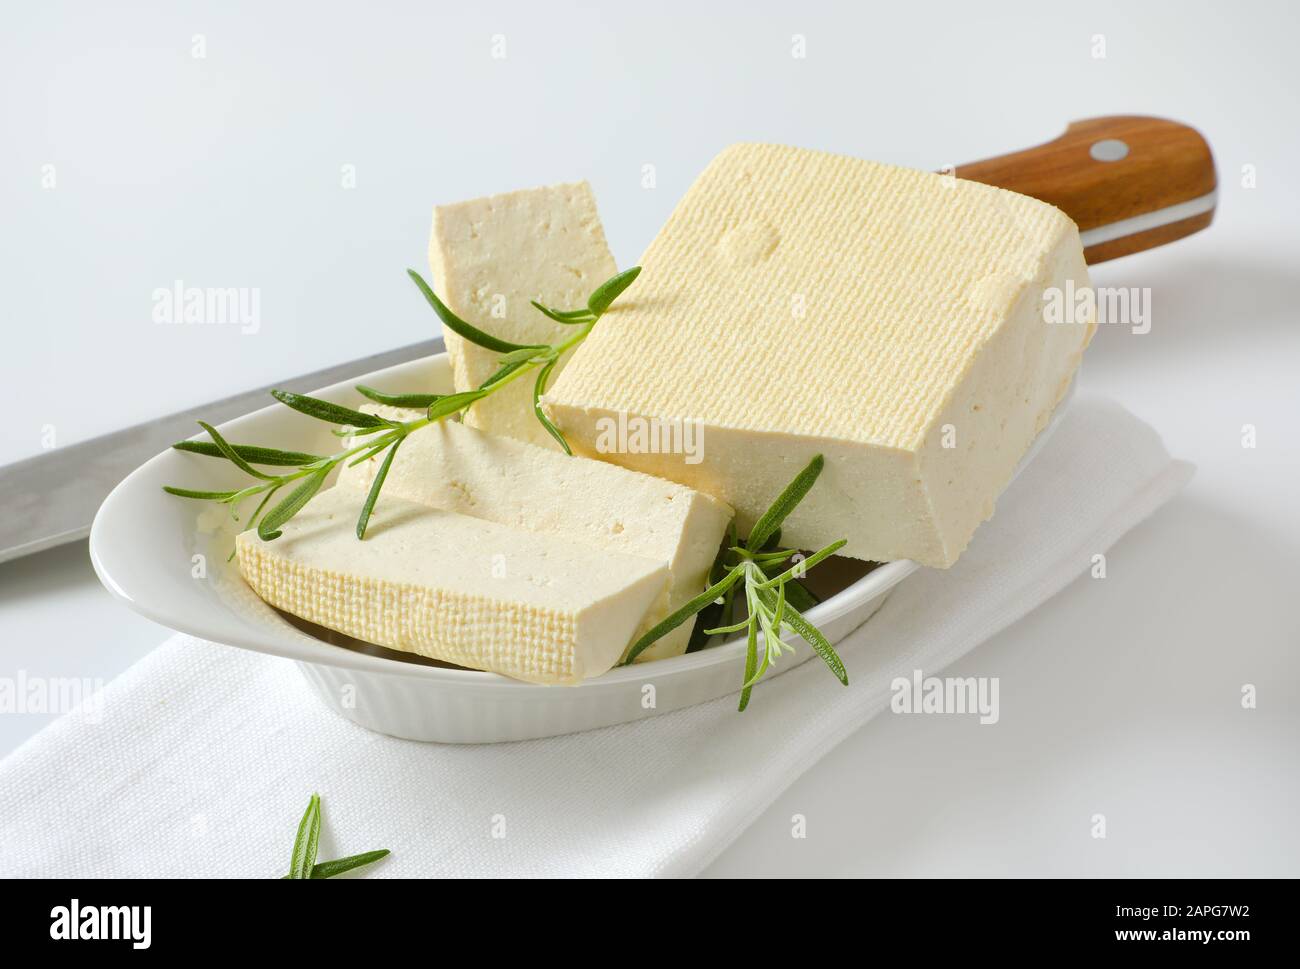 Half a block and slices of firm bean curd (tofu) in white bowl Stock Photo